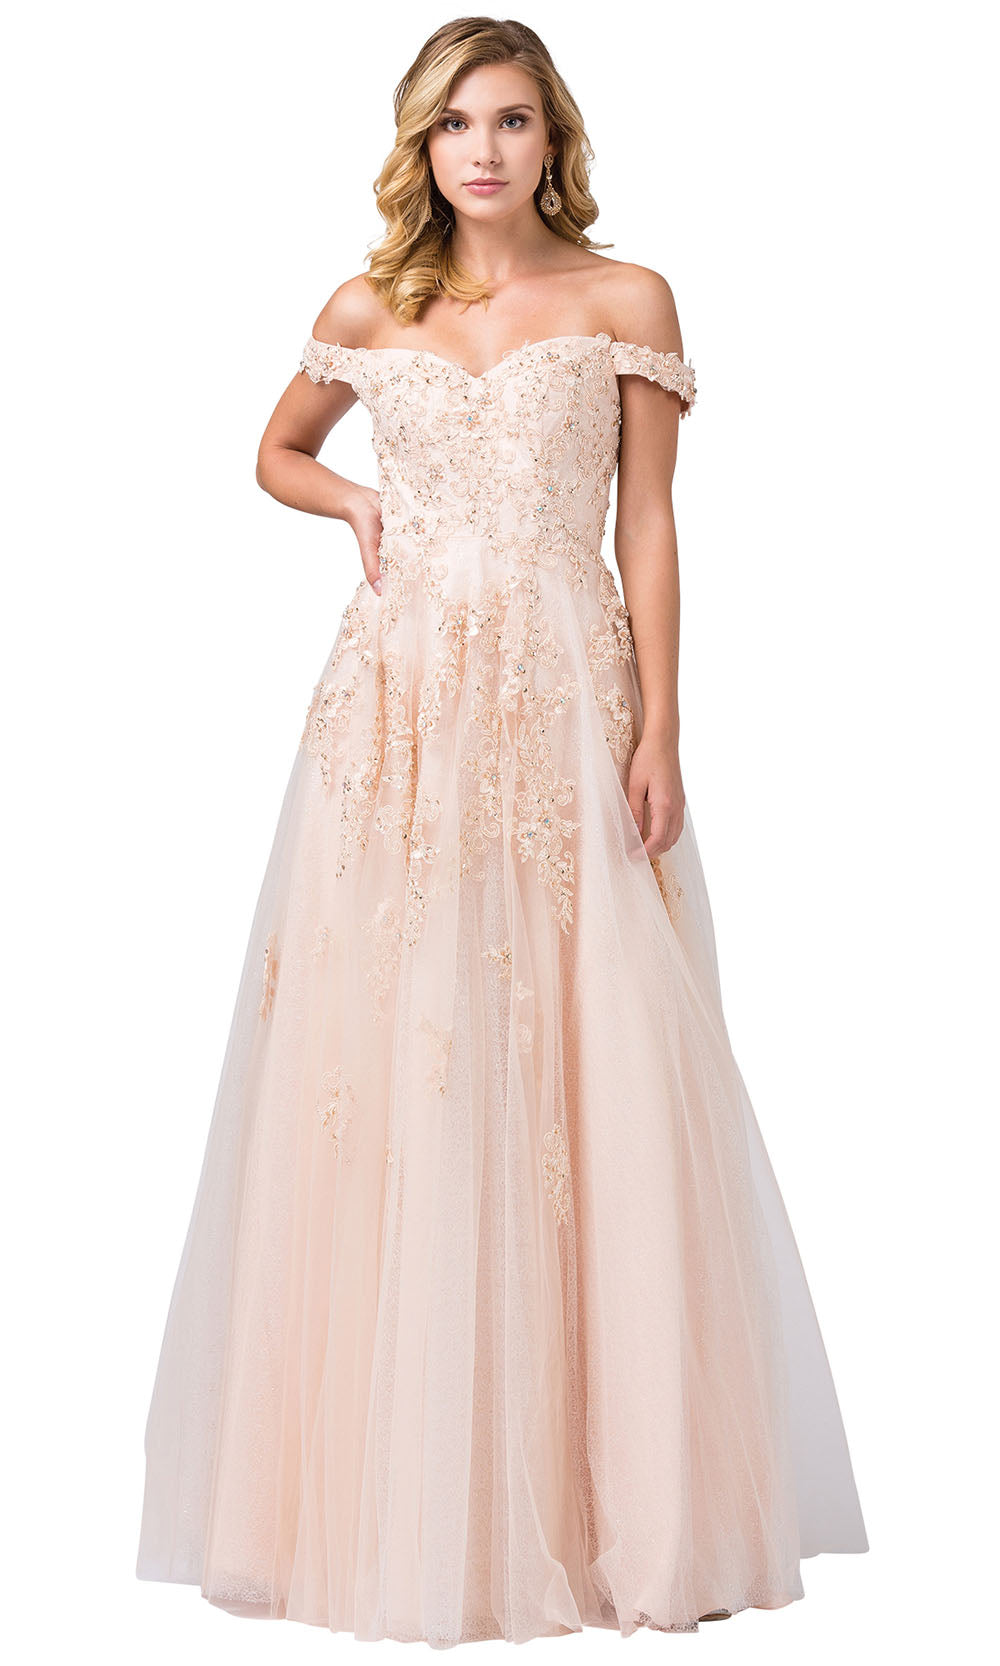 Dancing Queen - 2600 Embroidered Cap Sleeve V Neck A-Line Gown In Neutral